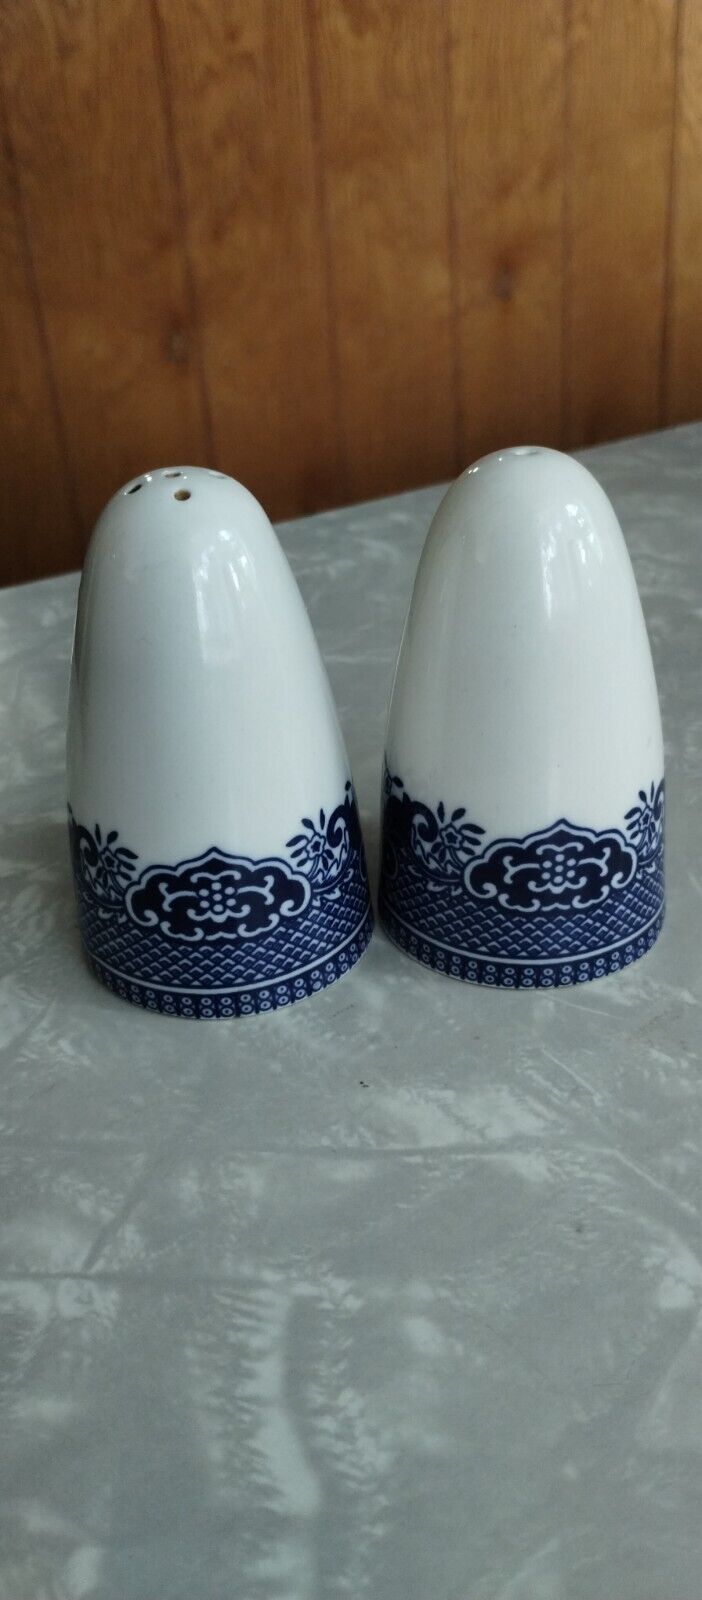 Vintage Blue Willow Pattern Salt and Pepper Shakers Set